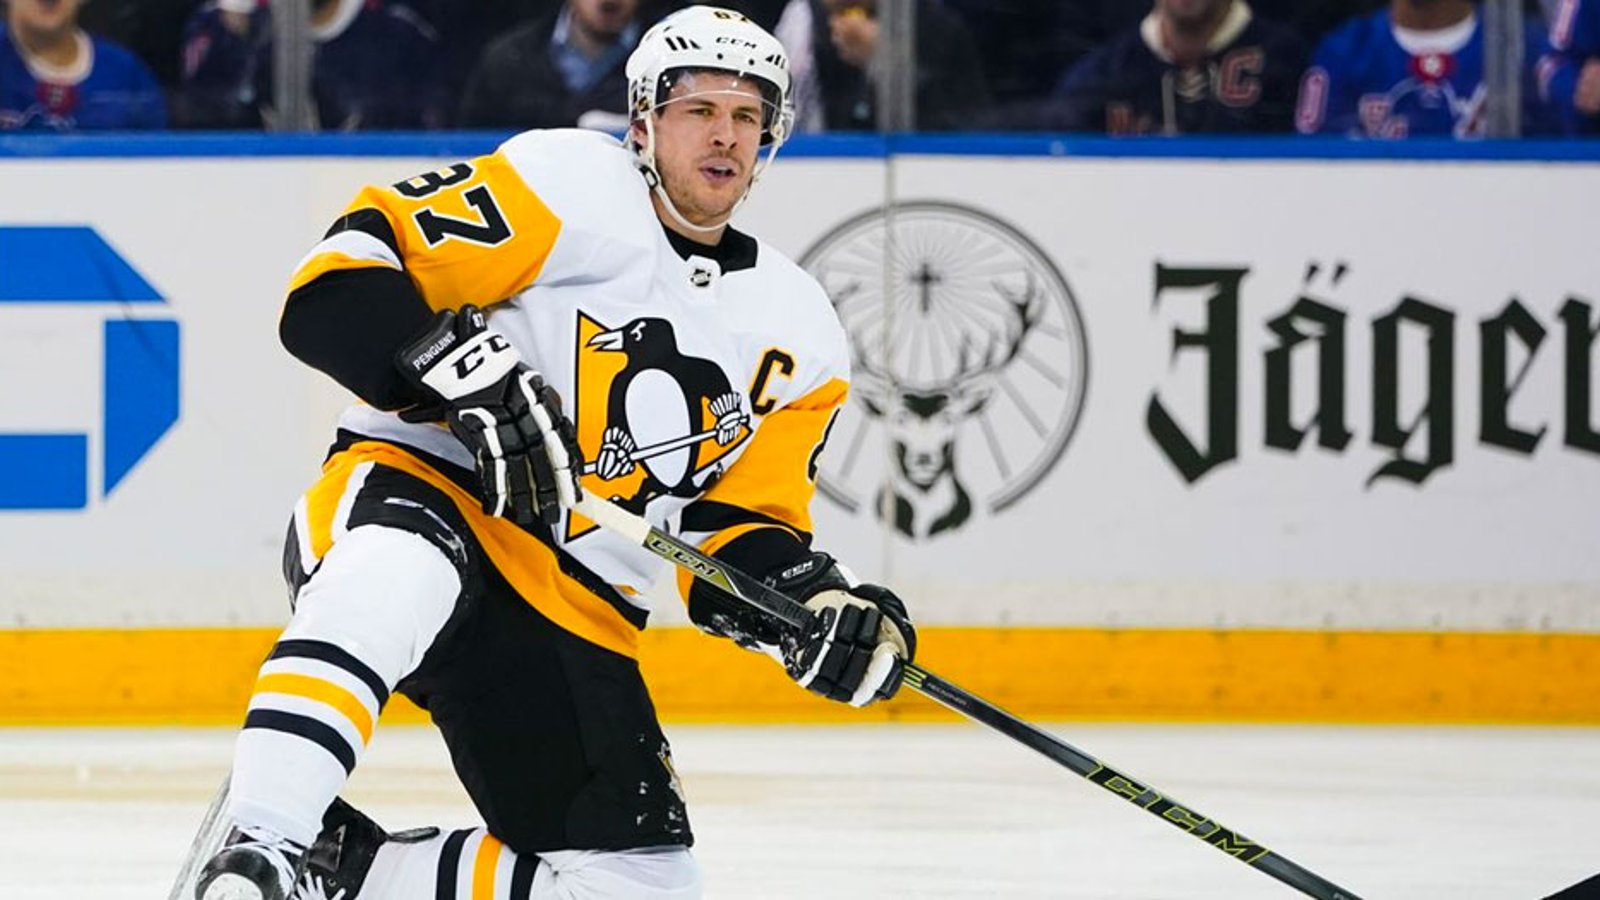 Crosby hints at retirement in interview with Sportsnet's Elliotte Friedman